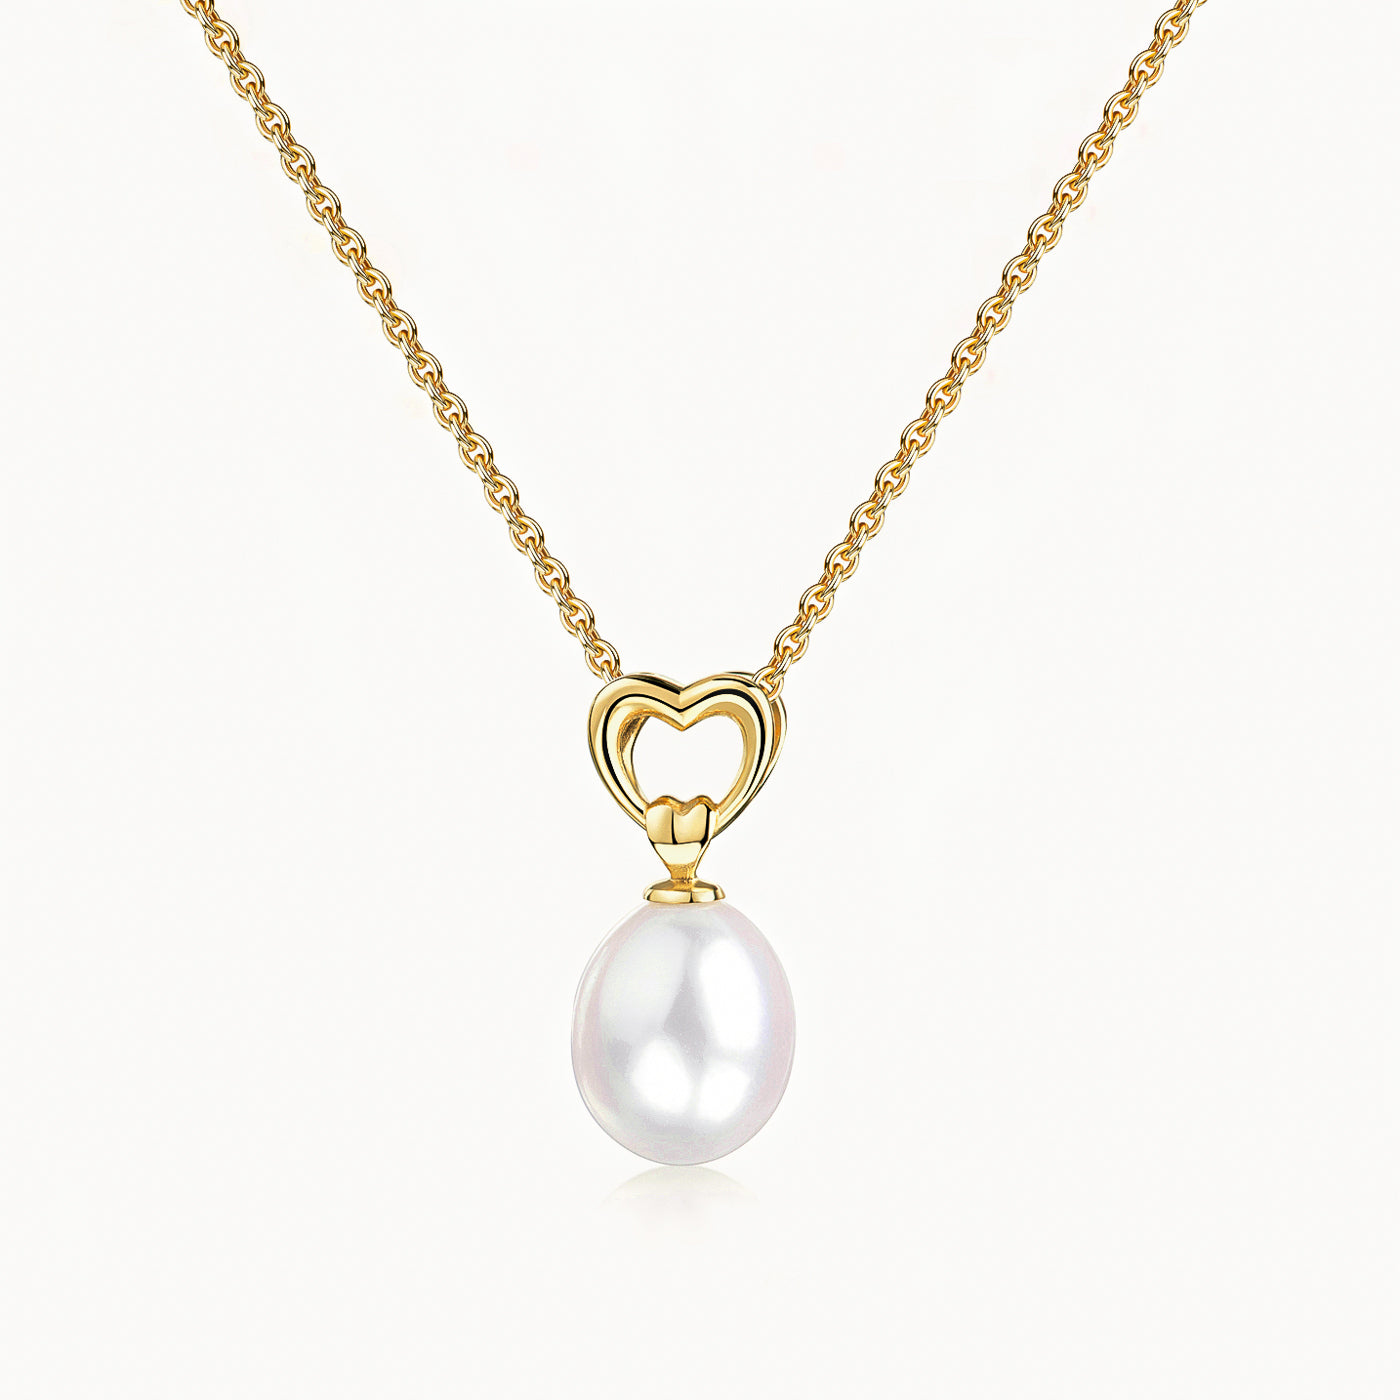 Pearl & Heart Pendant Necklace in 14k Gold Vermeil